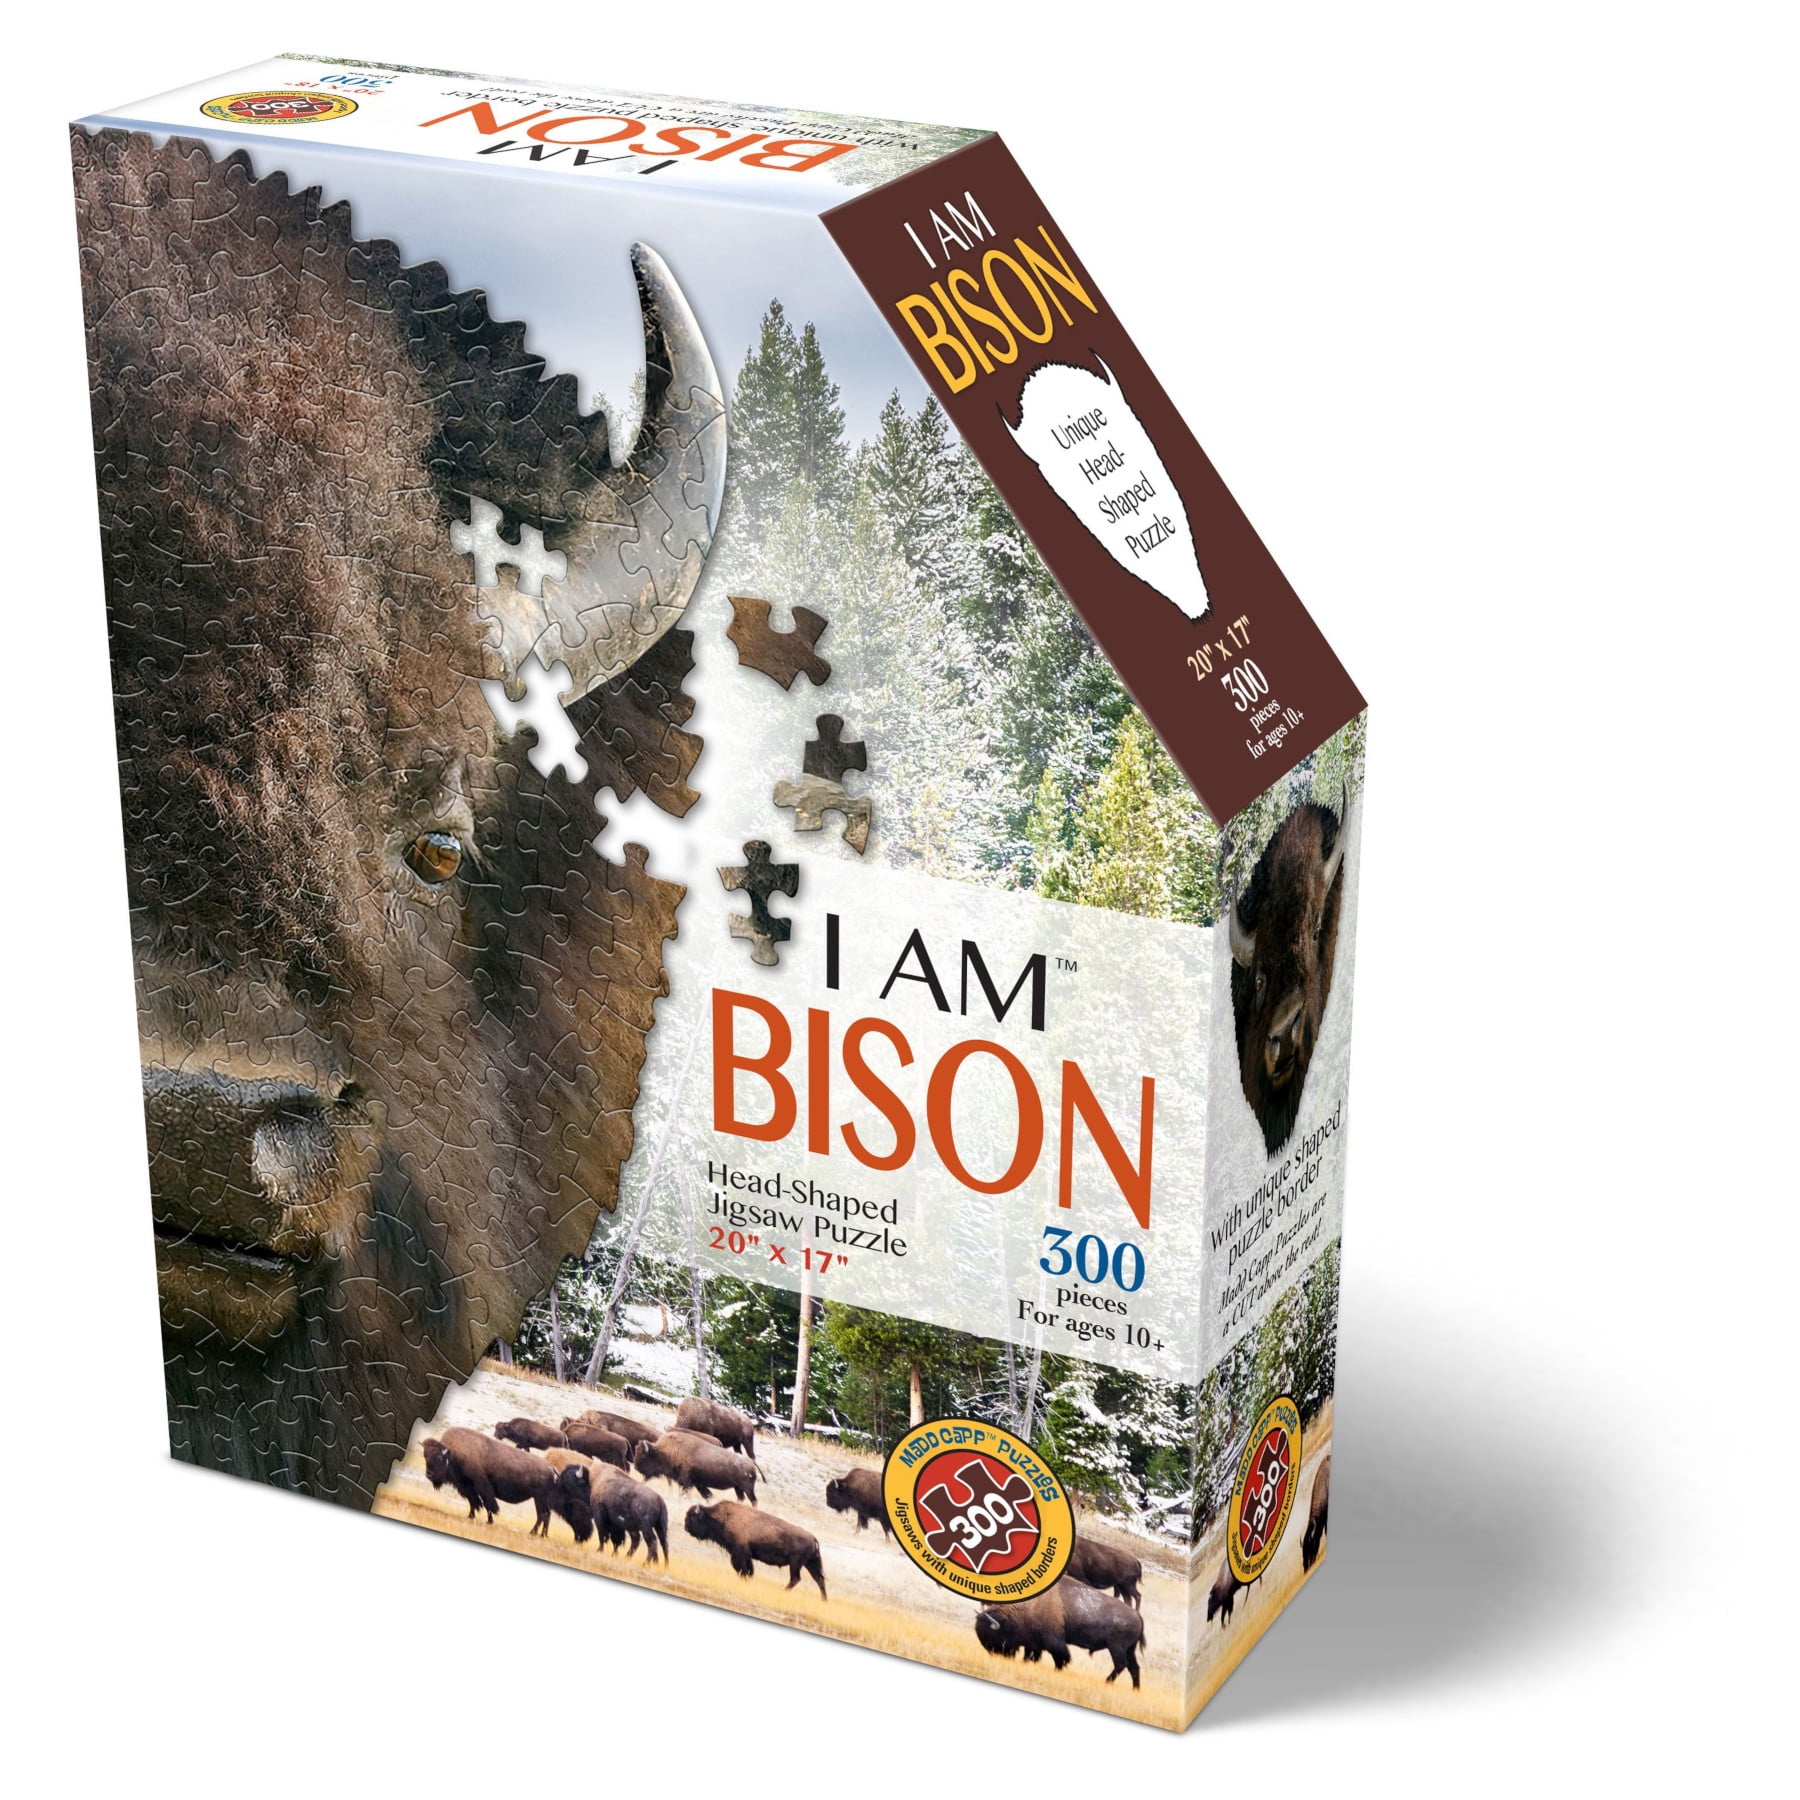 300 Pieces Animal Shaped Jigsaw Puzzle Madd CAPP Puzzles I AM Bison